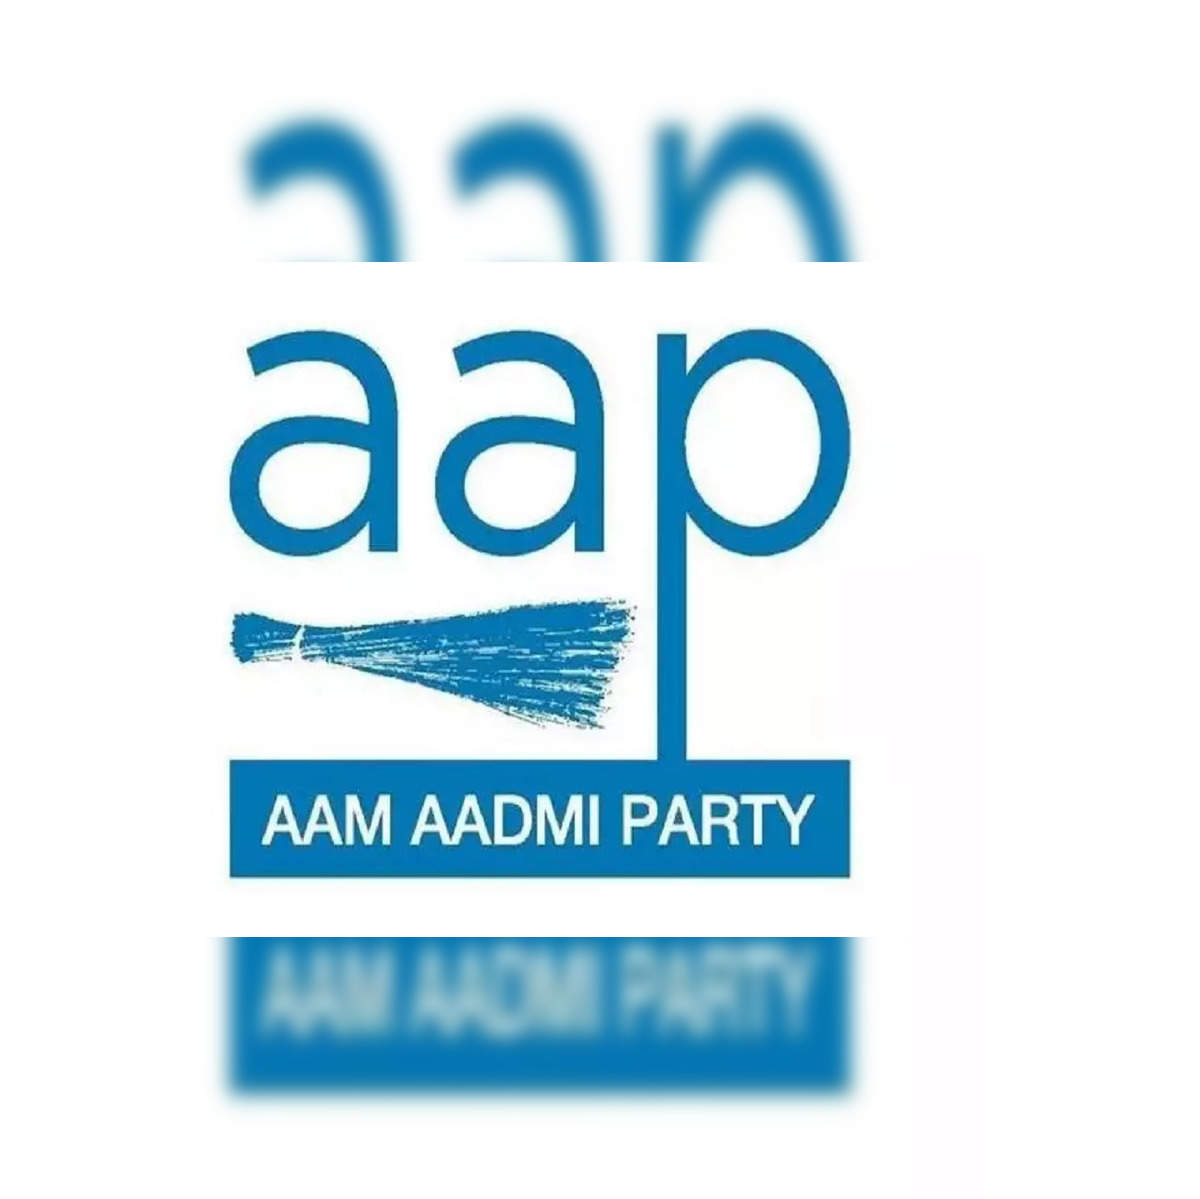 PEACOCKRIDE Vote for Your Party I Aam Aadmi Party Symbols Pin Badge Set of  12 No's (Metal, Multicolor, 37mm) : Amazon.in: Toys & Games